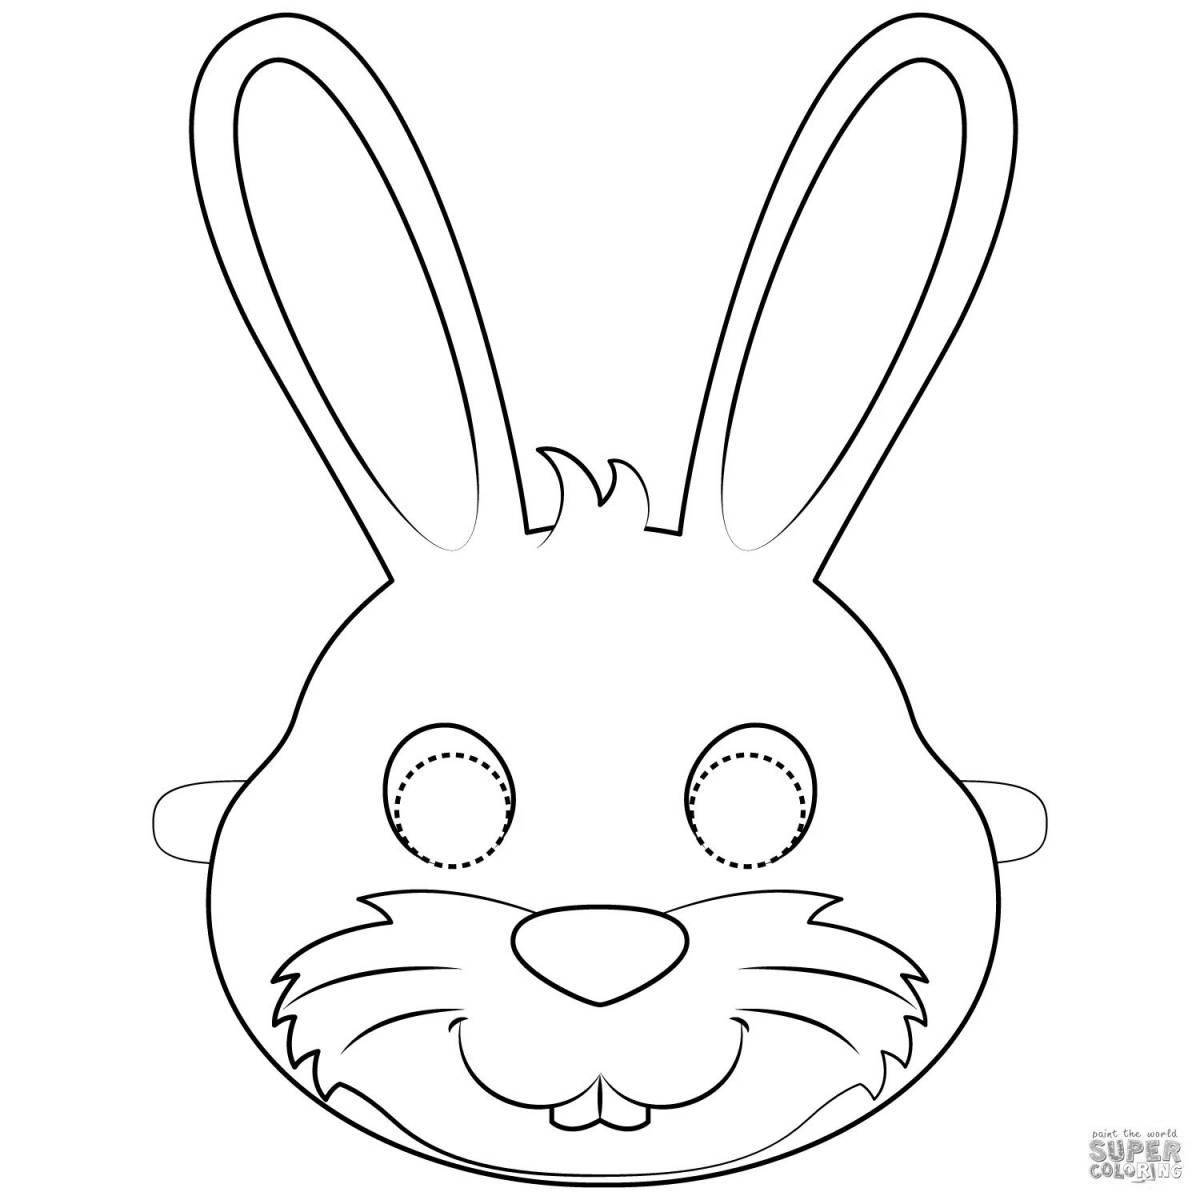 Amazing hare head coloring page